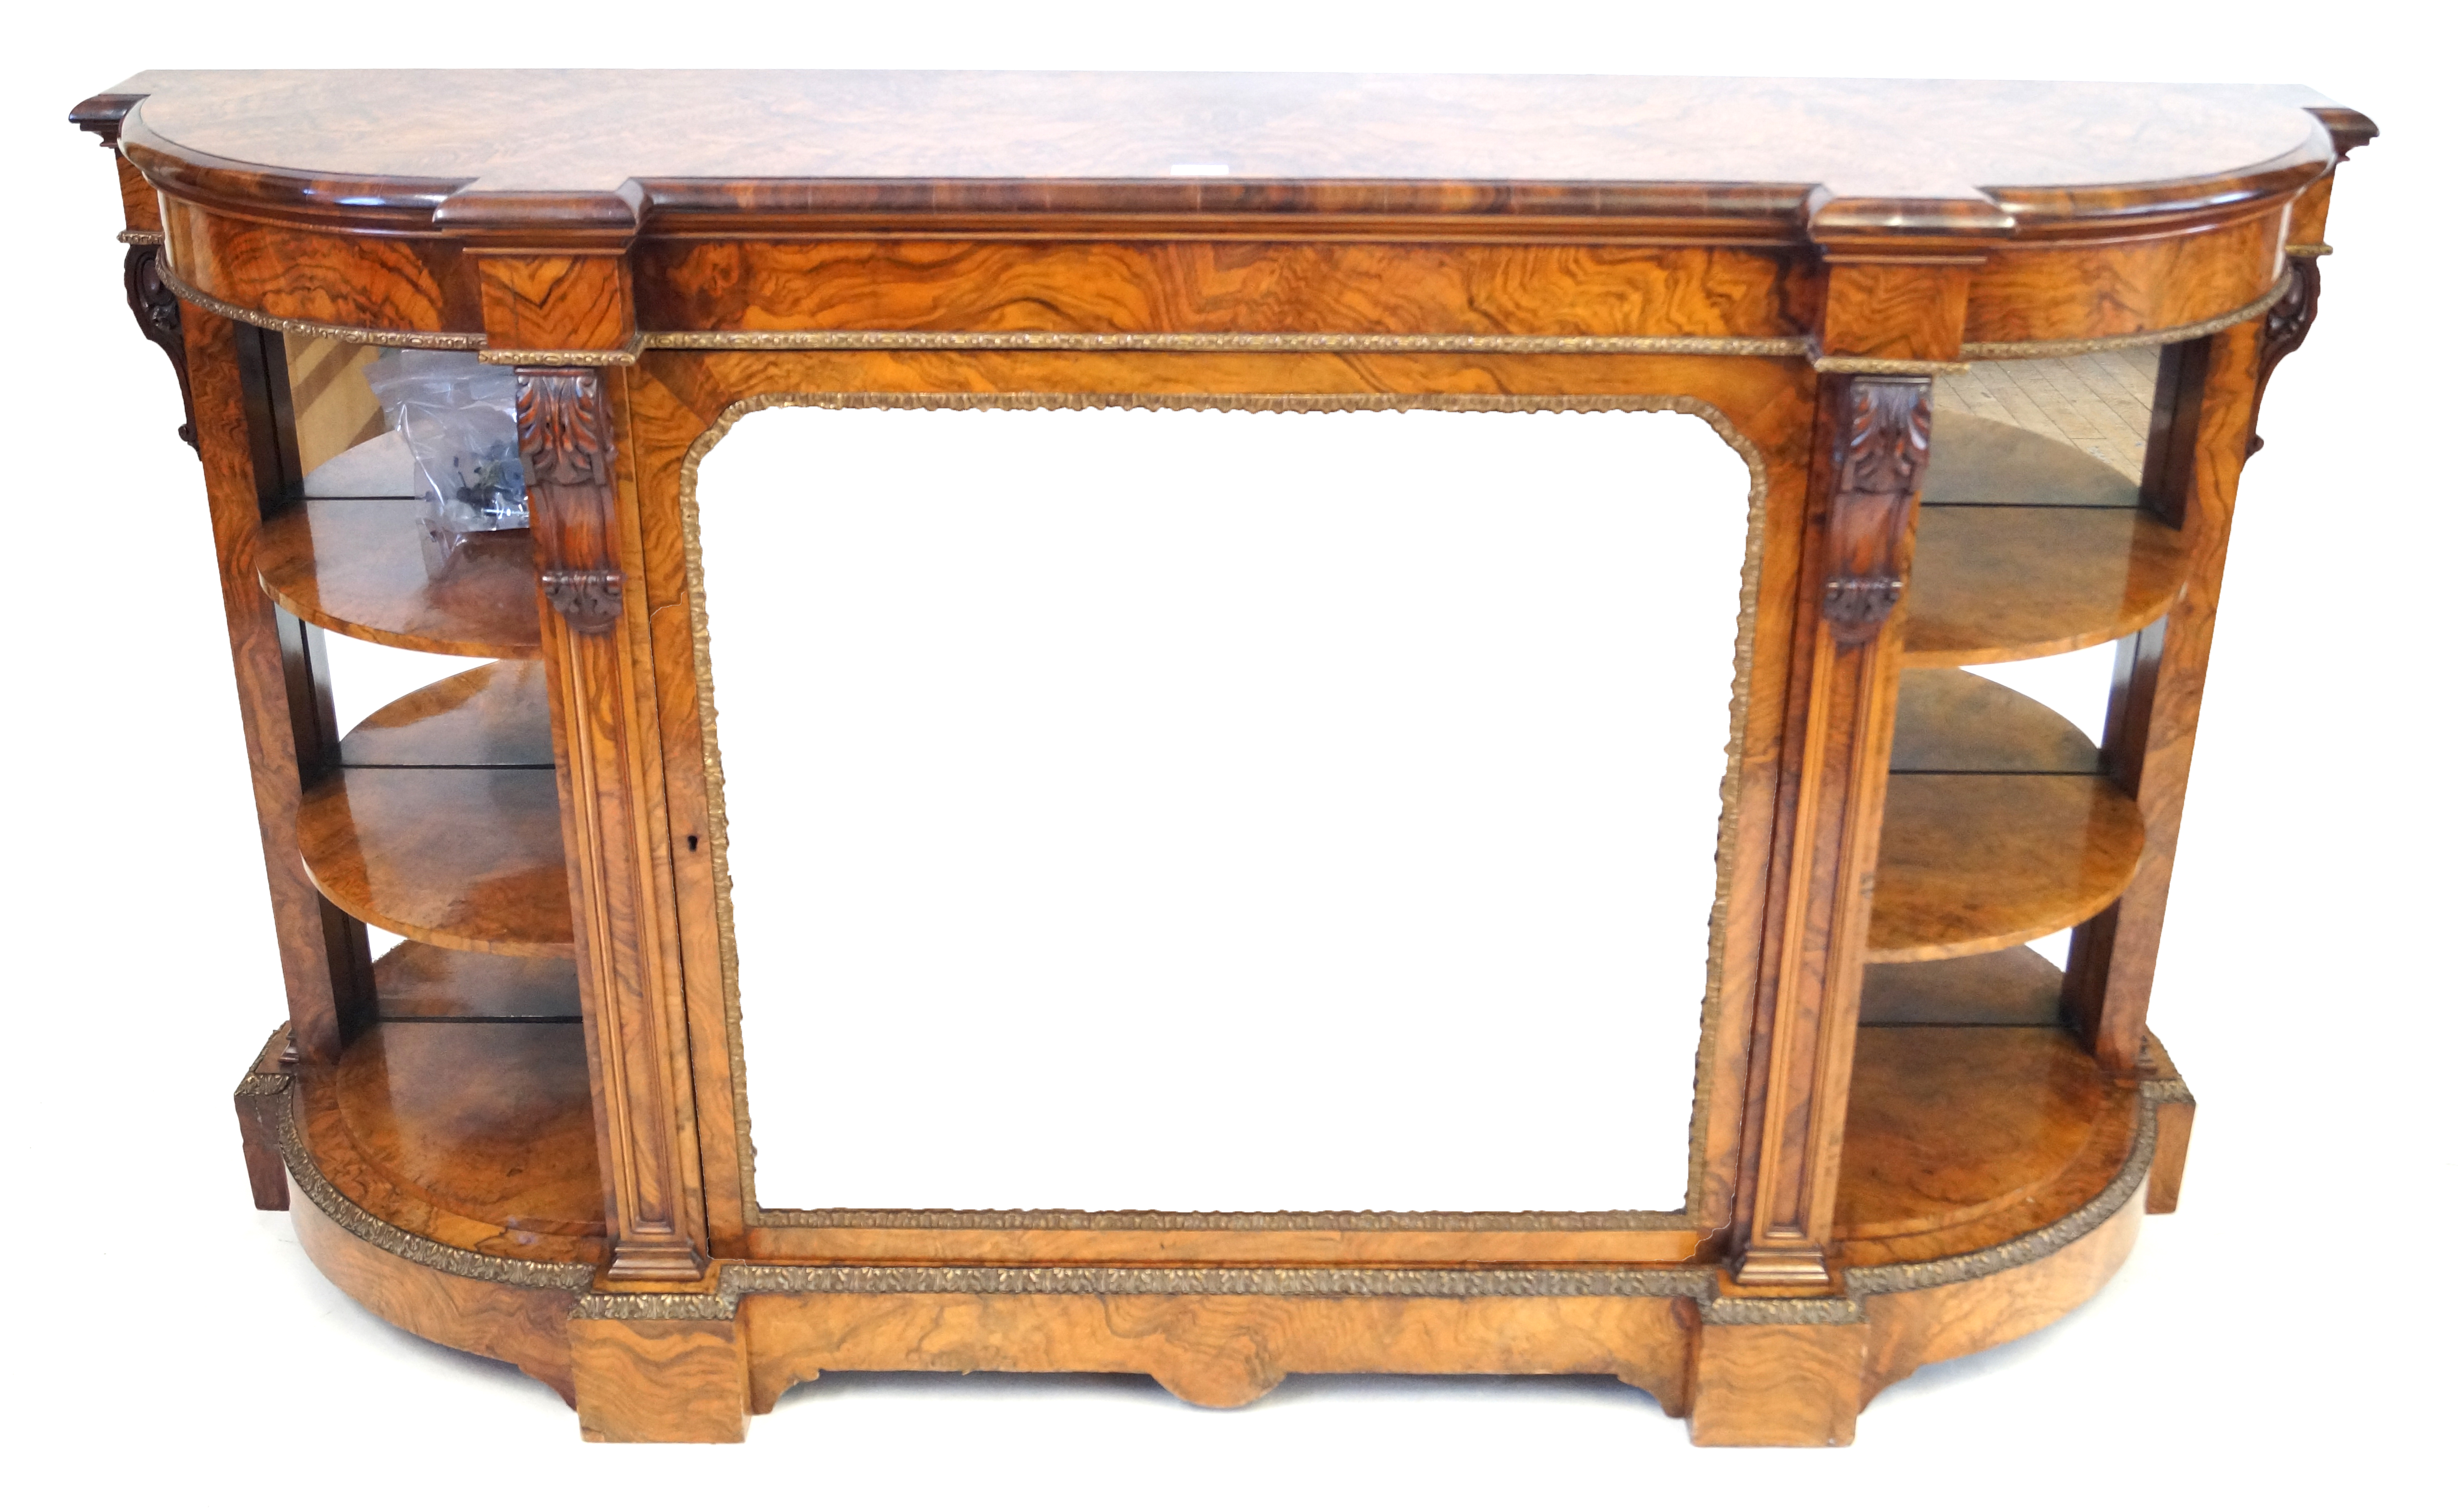 A fine quality Victorian gilt metal mounted figured walnut credenza The highly decorative shaped